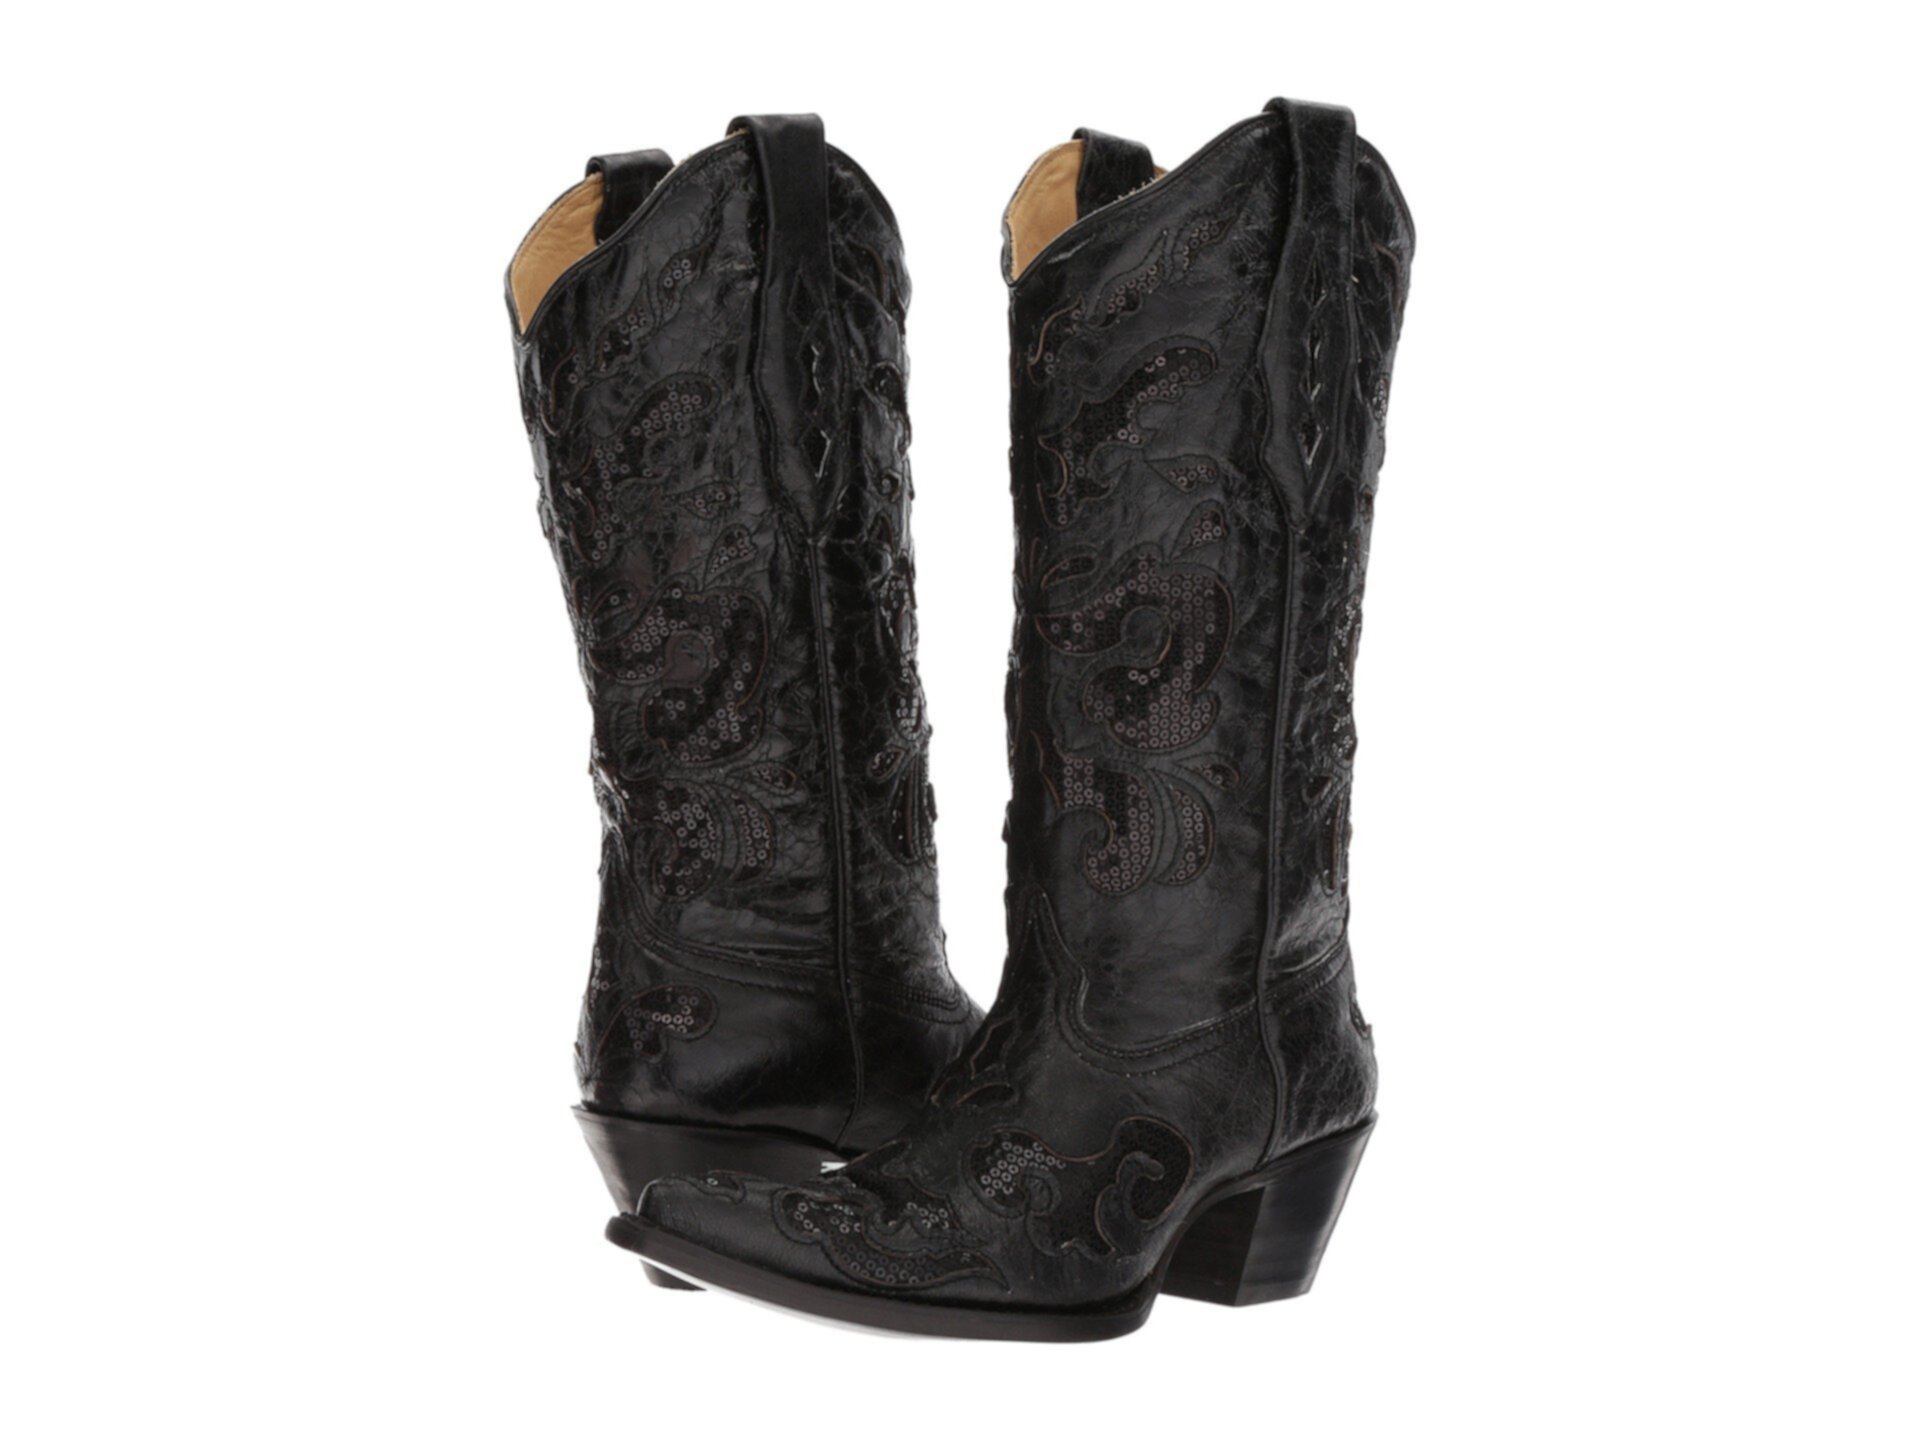 A1070 Corral Boots